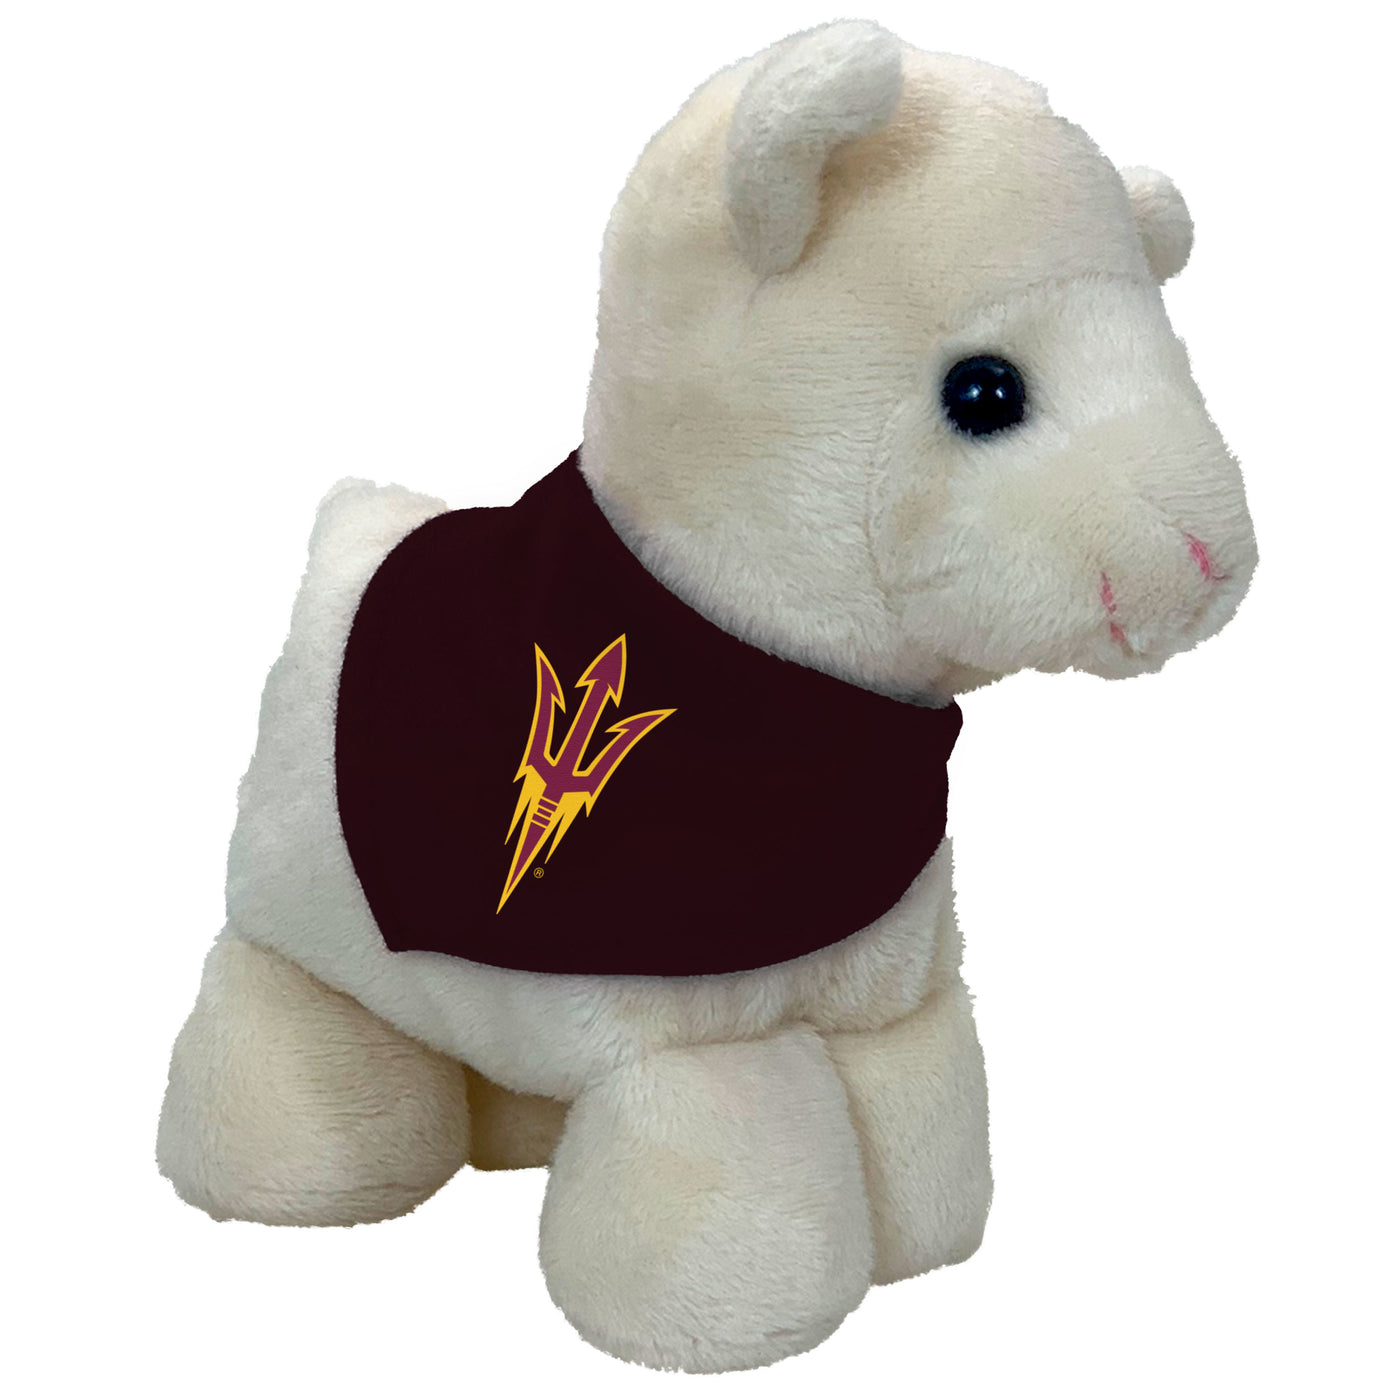 ASu cream colored llama with maroon ascot with a pitchfork on it